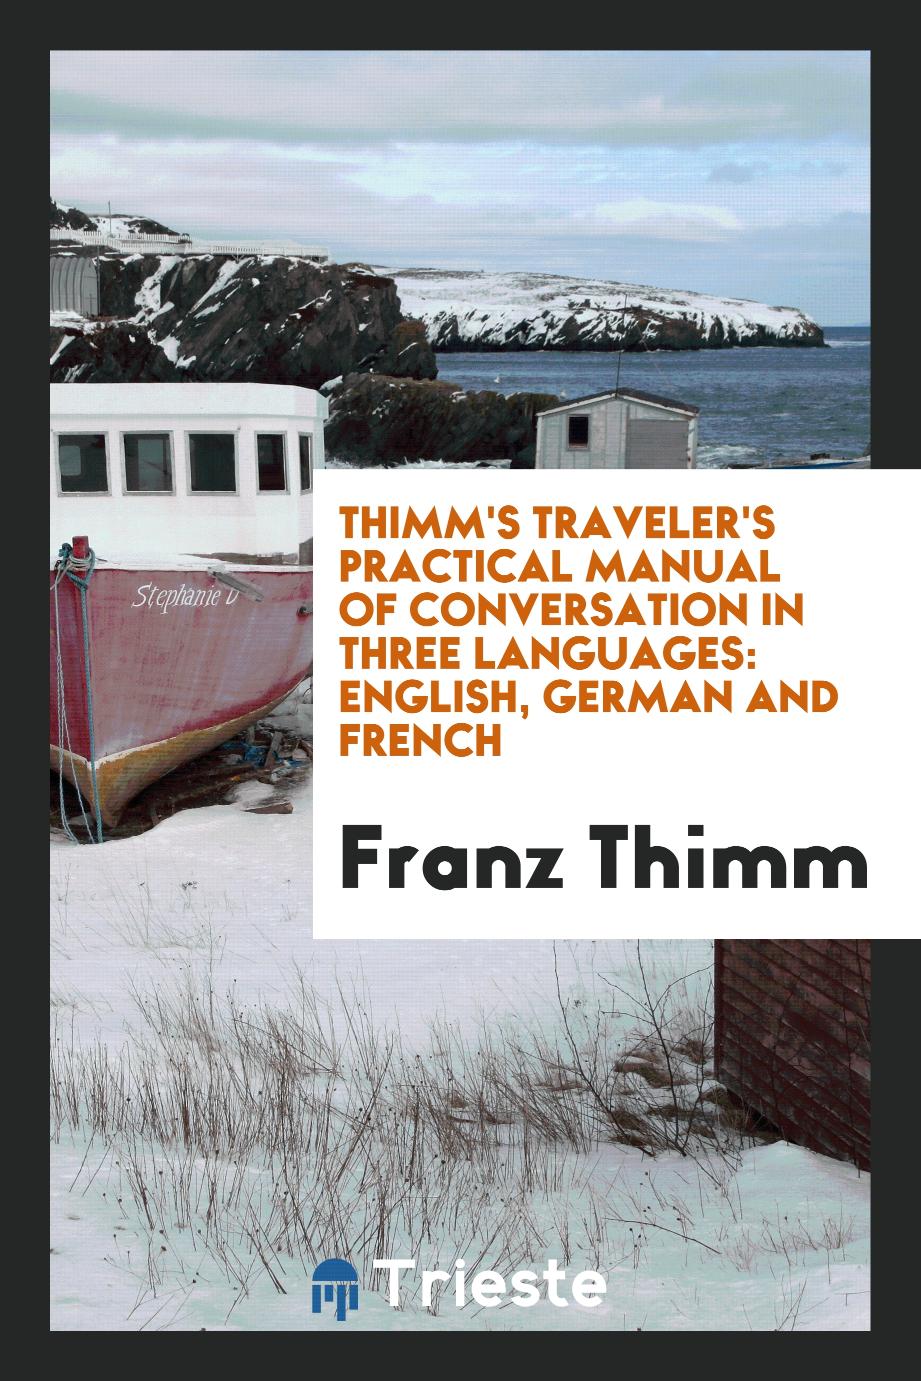 Thimm's Traveler's Practical Manual of Conversation in Three Languages: English, German and French